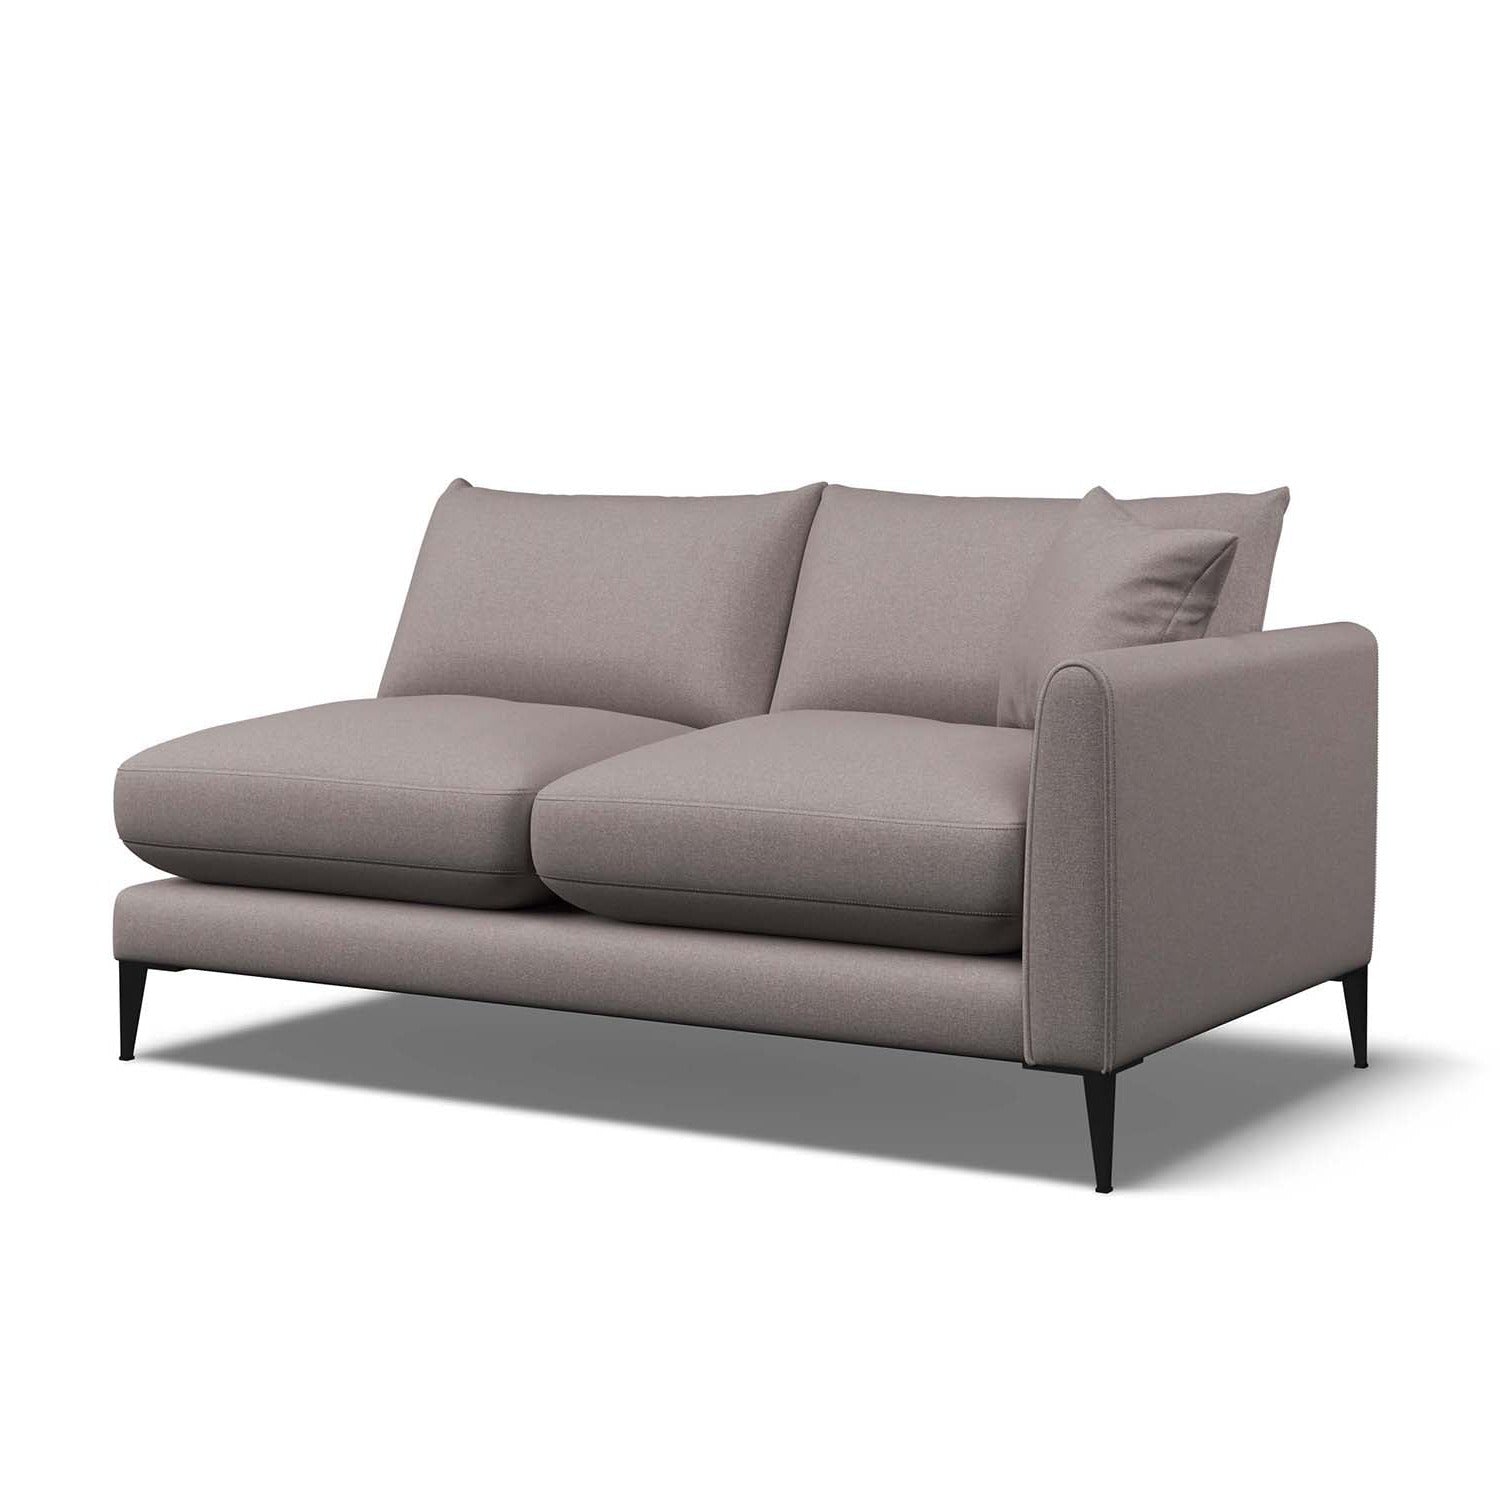 Design Your Own Configuration With The Kit Sofa 